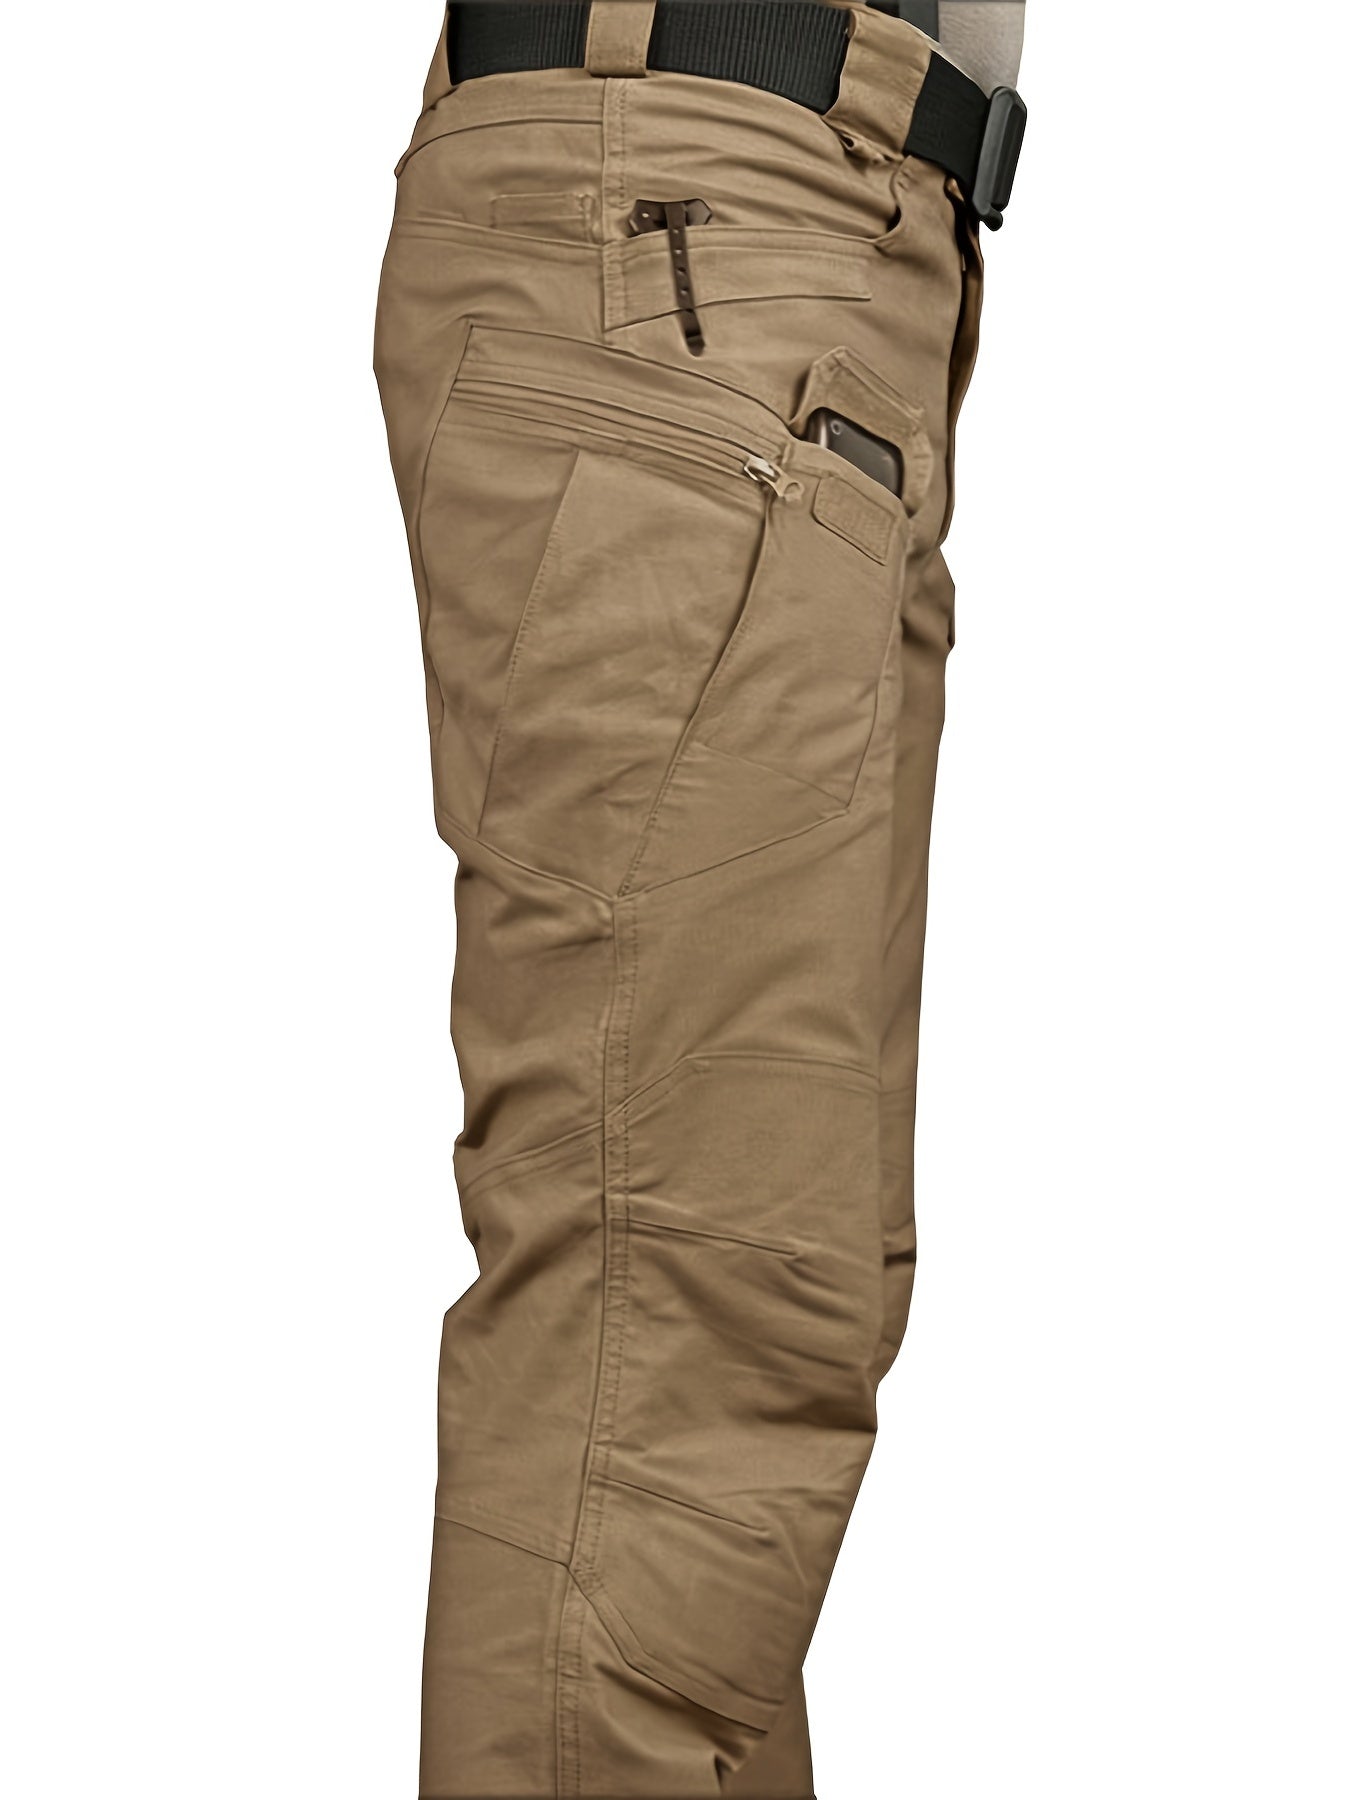 High Quality Men's Waterproof Tactical Pants Army Users Outside Sports Hiking Pants